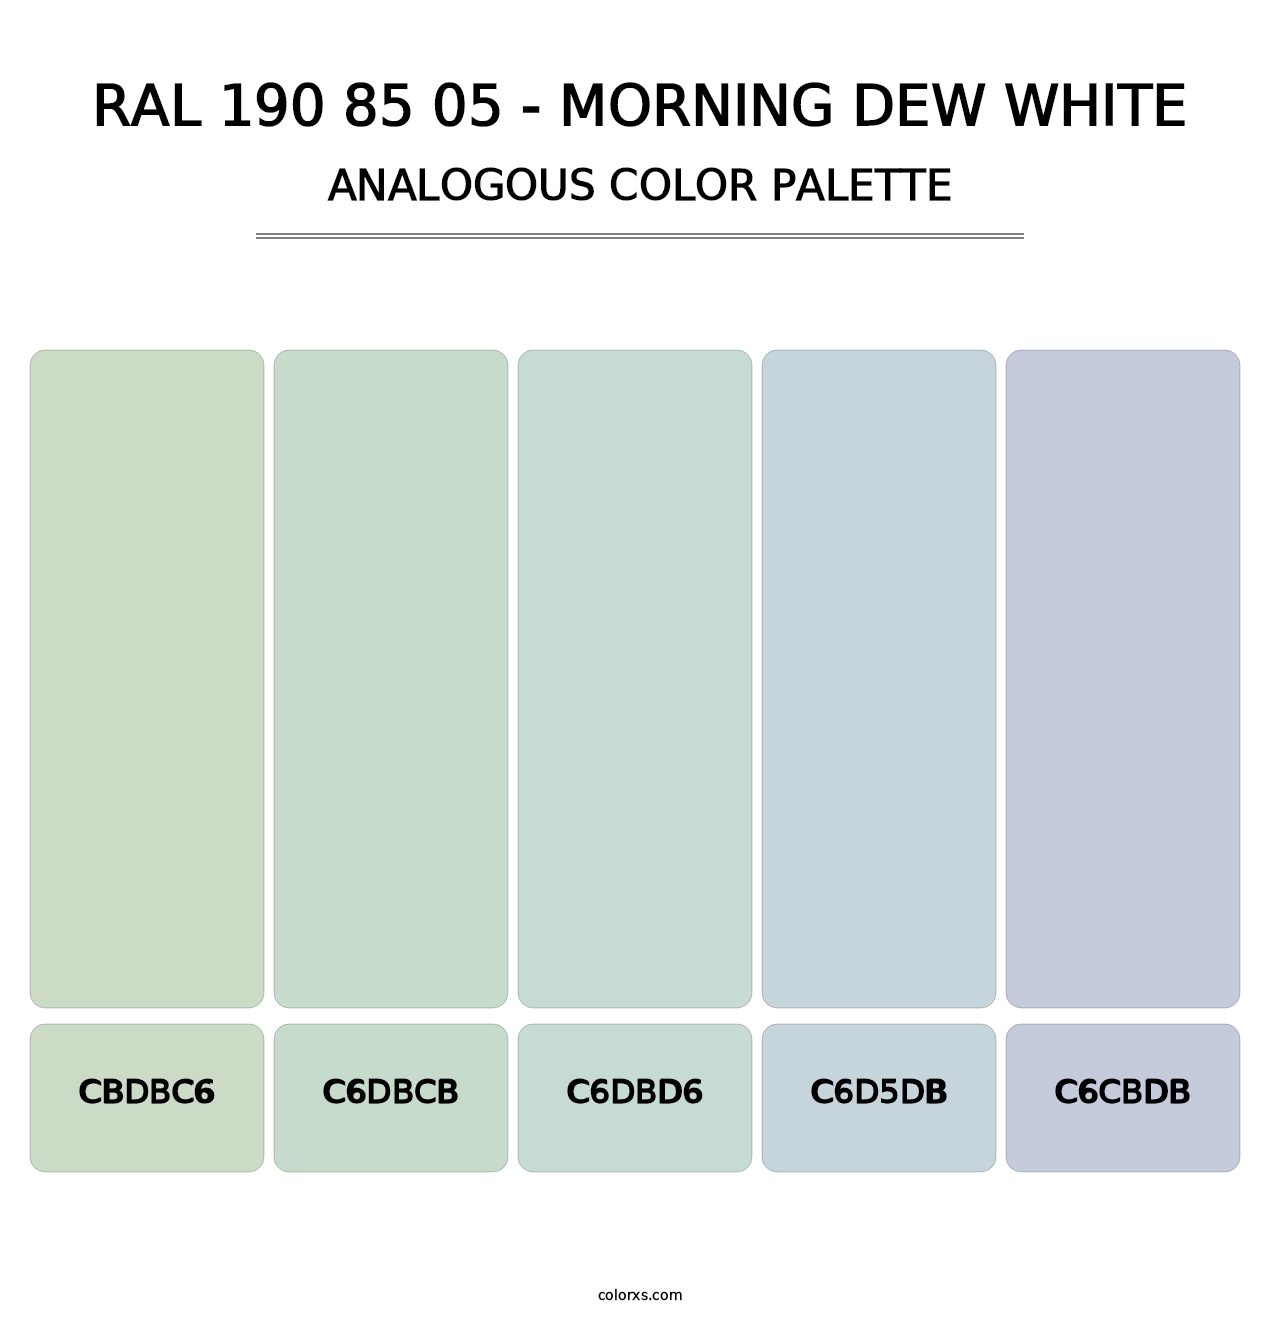 RAL 190 85 05 - Morning Dew White - Analogous Color Palette